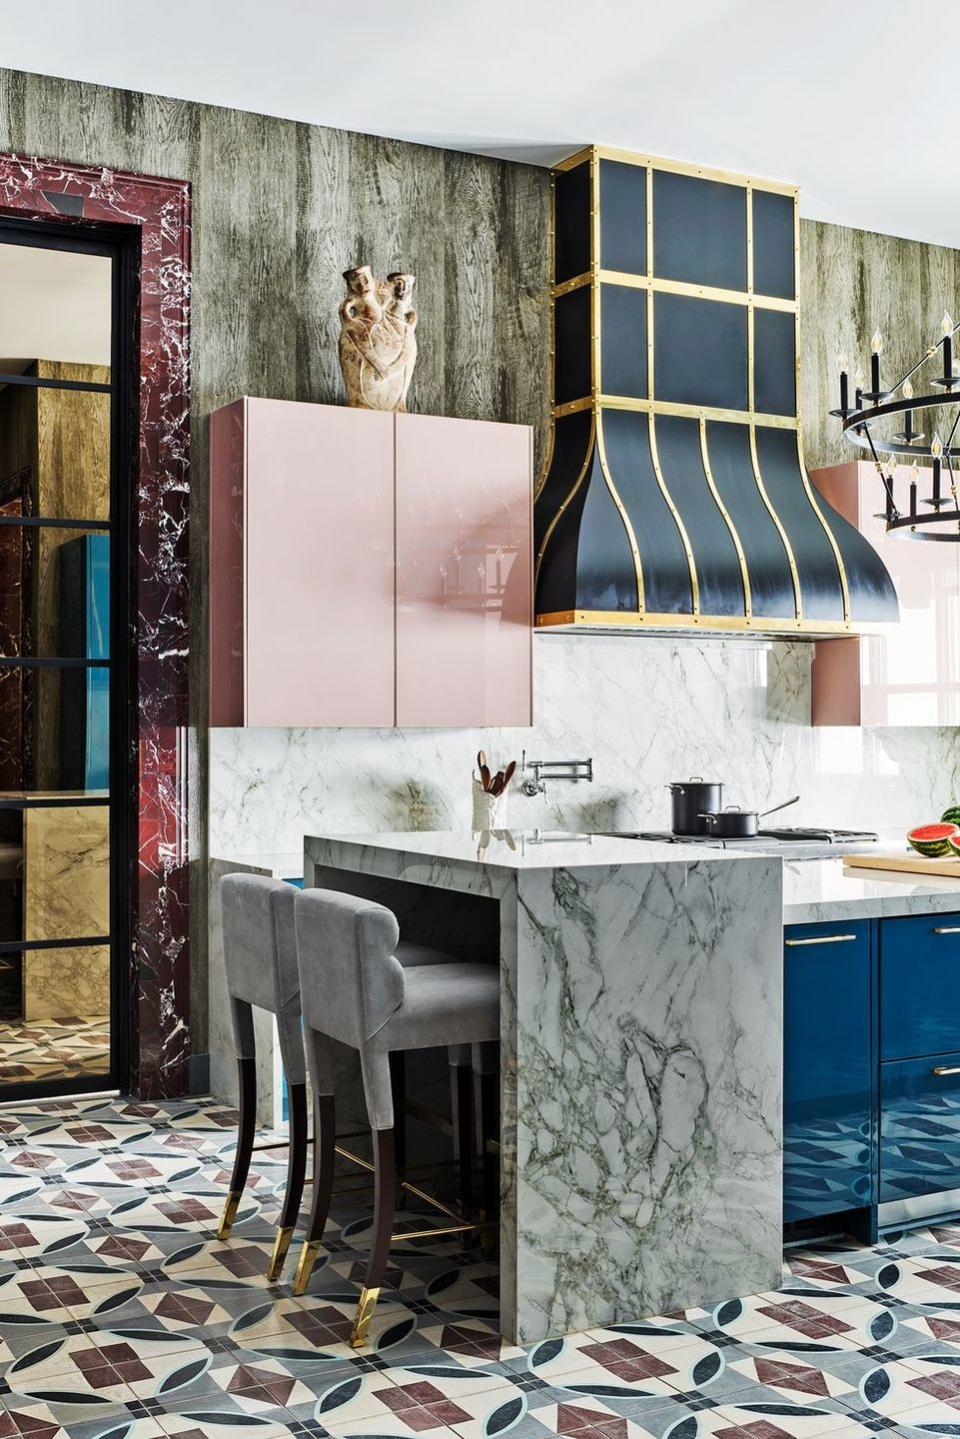 95 Designer Kitchens That'll Inspire You to Renovate Yours